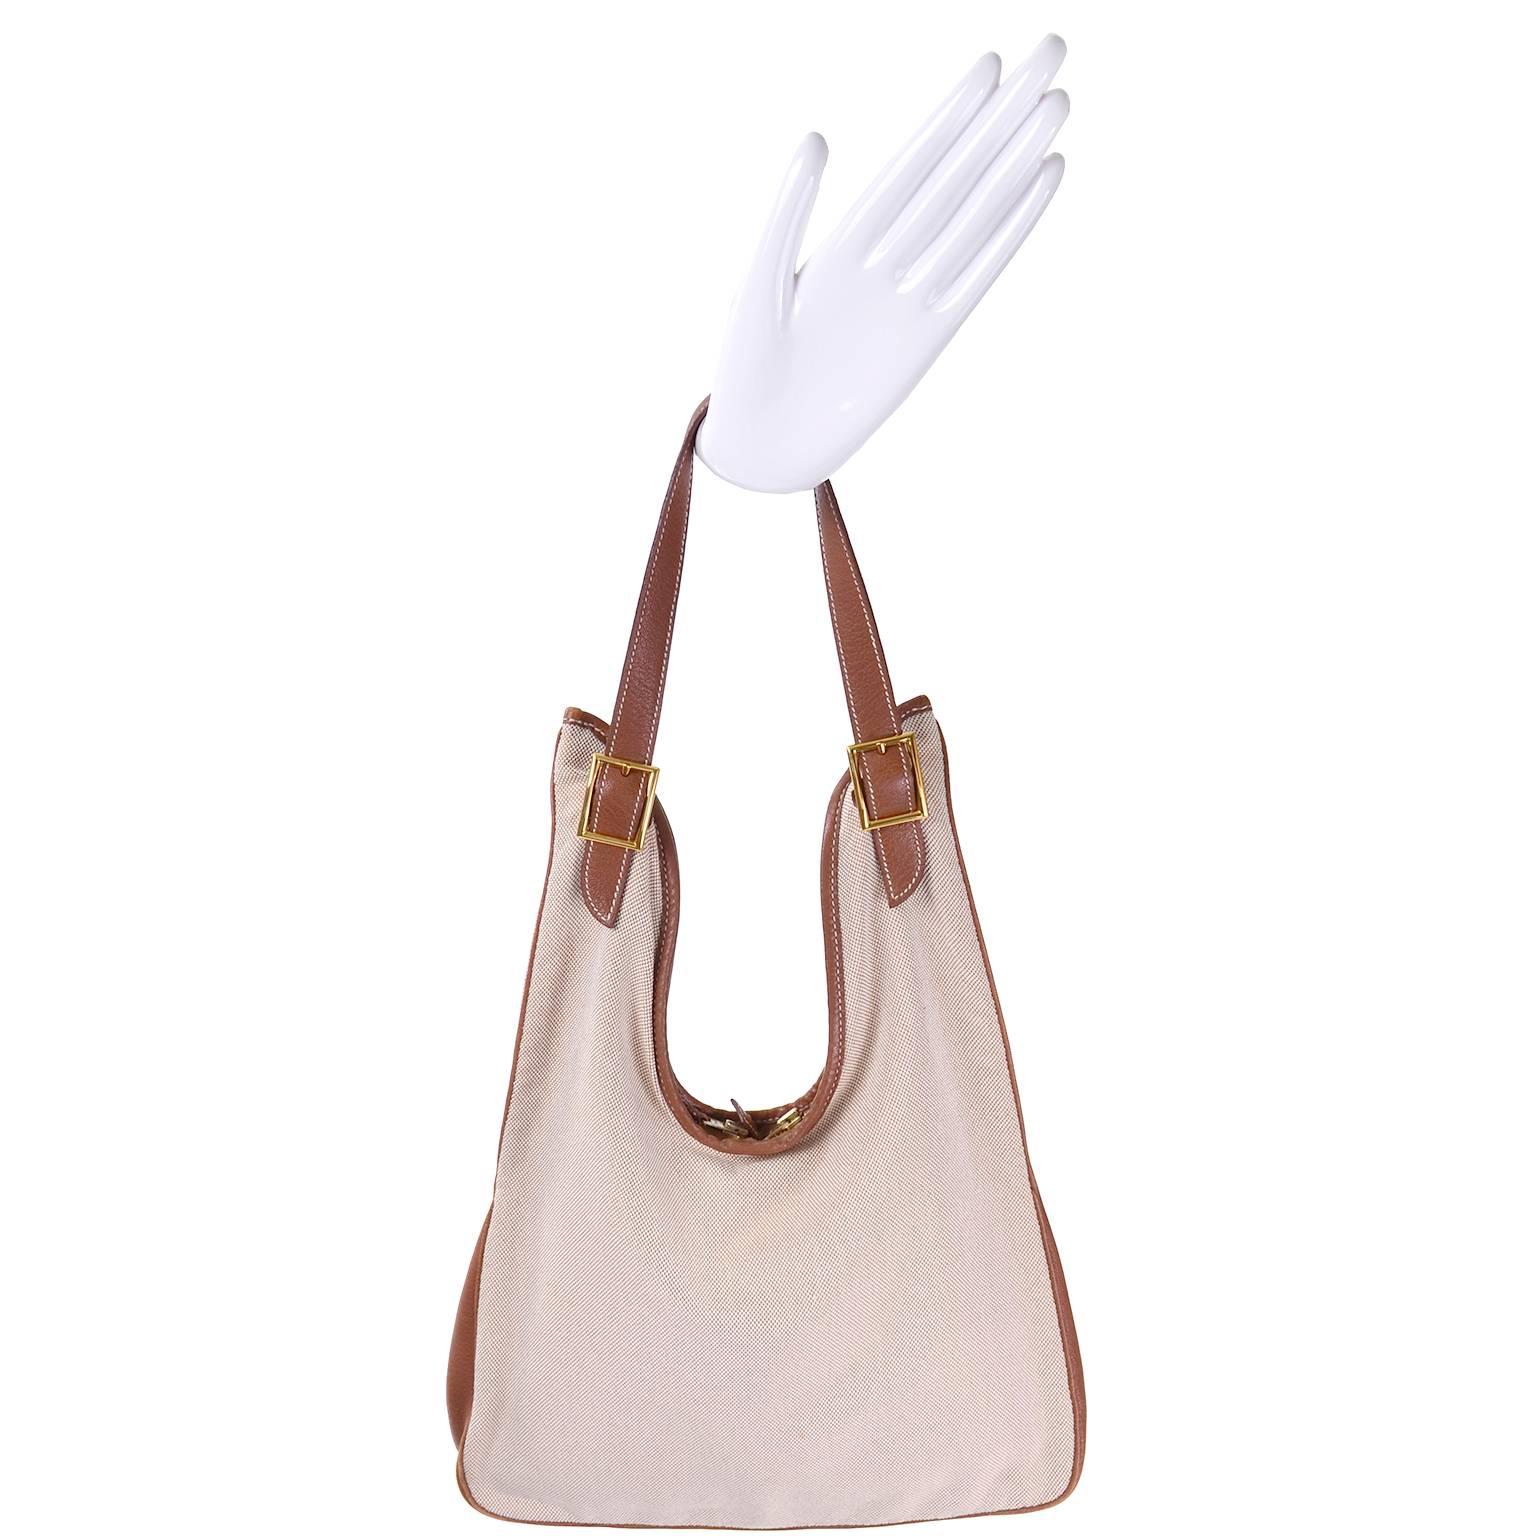 This is a great authentic Hermes France Massai Cut Handbag in beige canvas fabric with brown leather trim and the same fabulous full leather lining. This double zip top hobo style bag has adjustable gold buckles, an inside zip pocket, and it